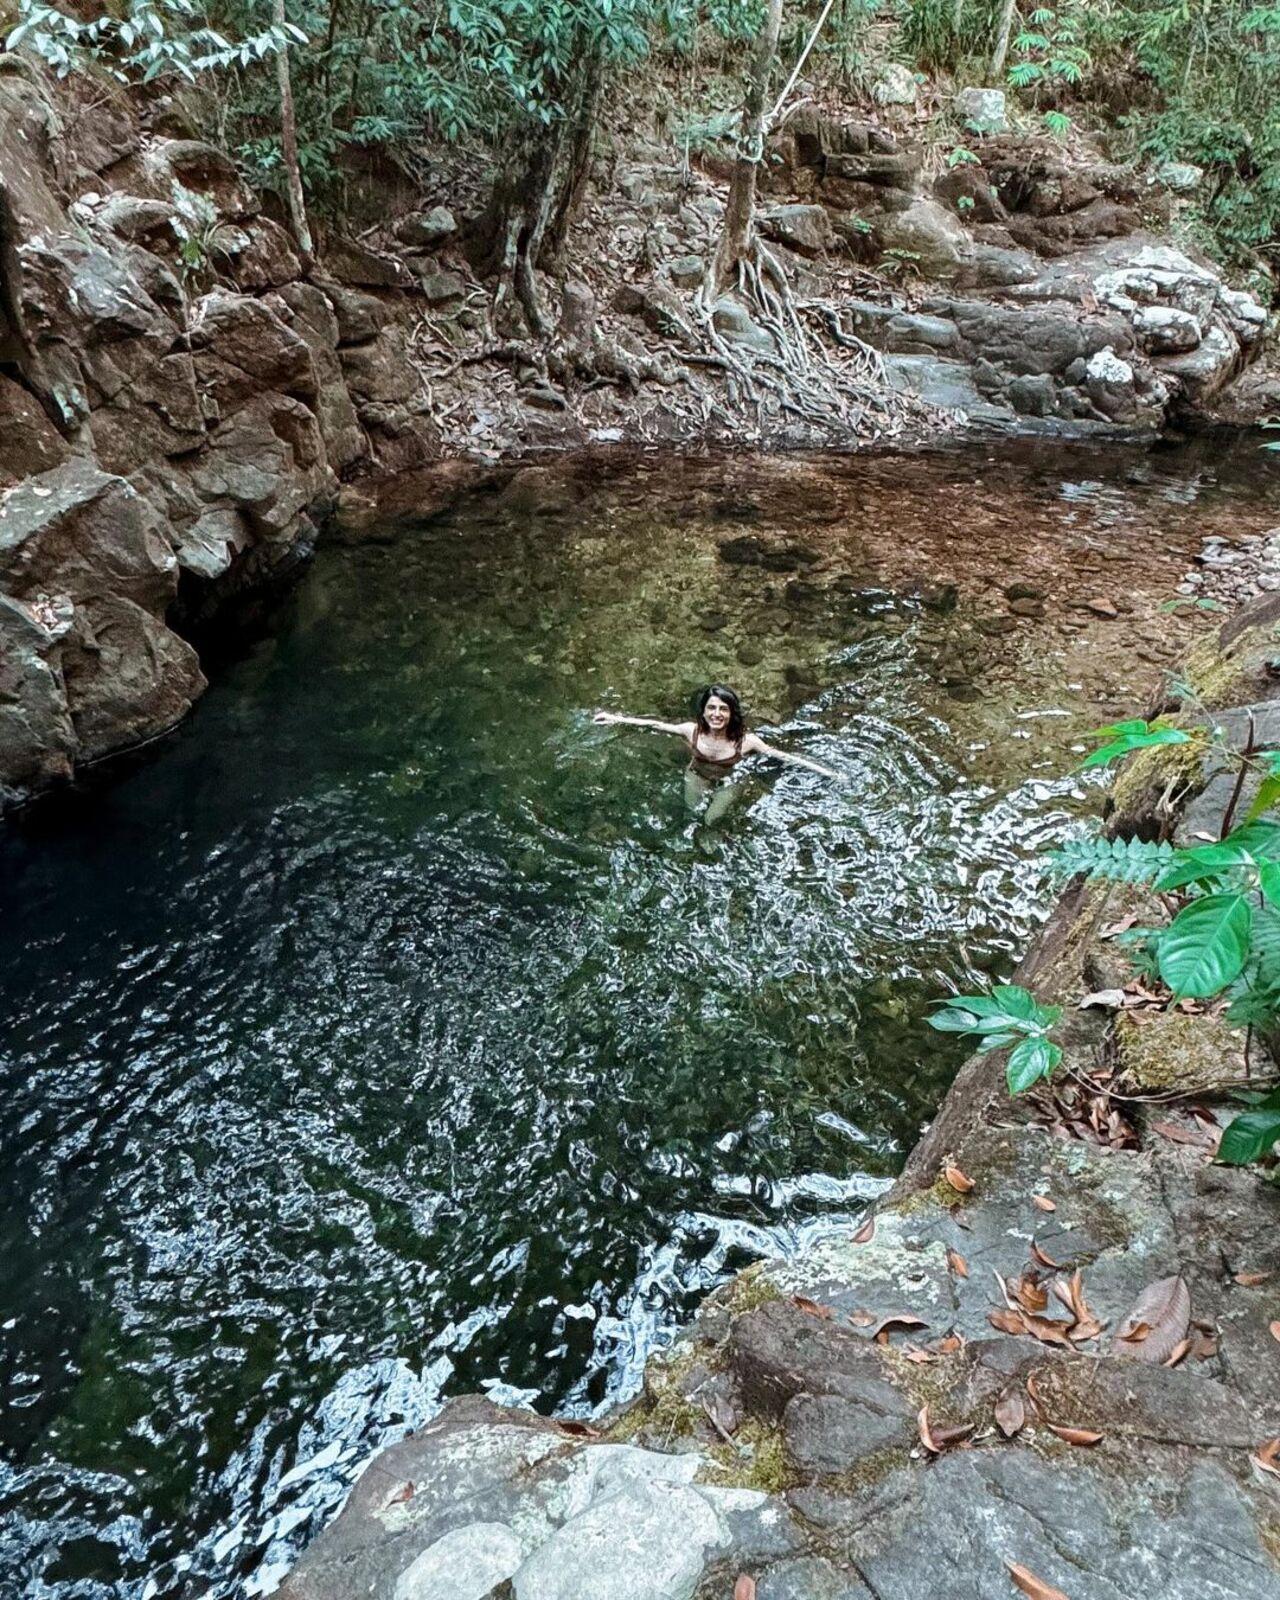 Samantha takes a swim in a stream in the midst of a Malaysian forest